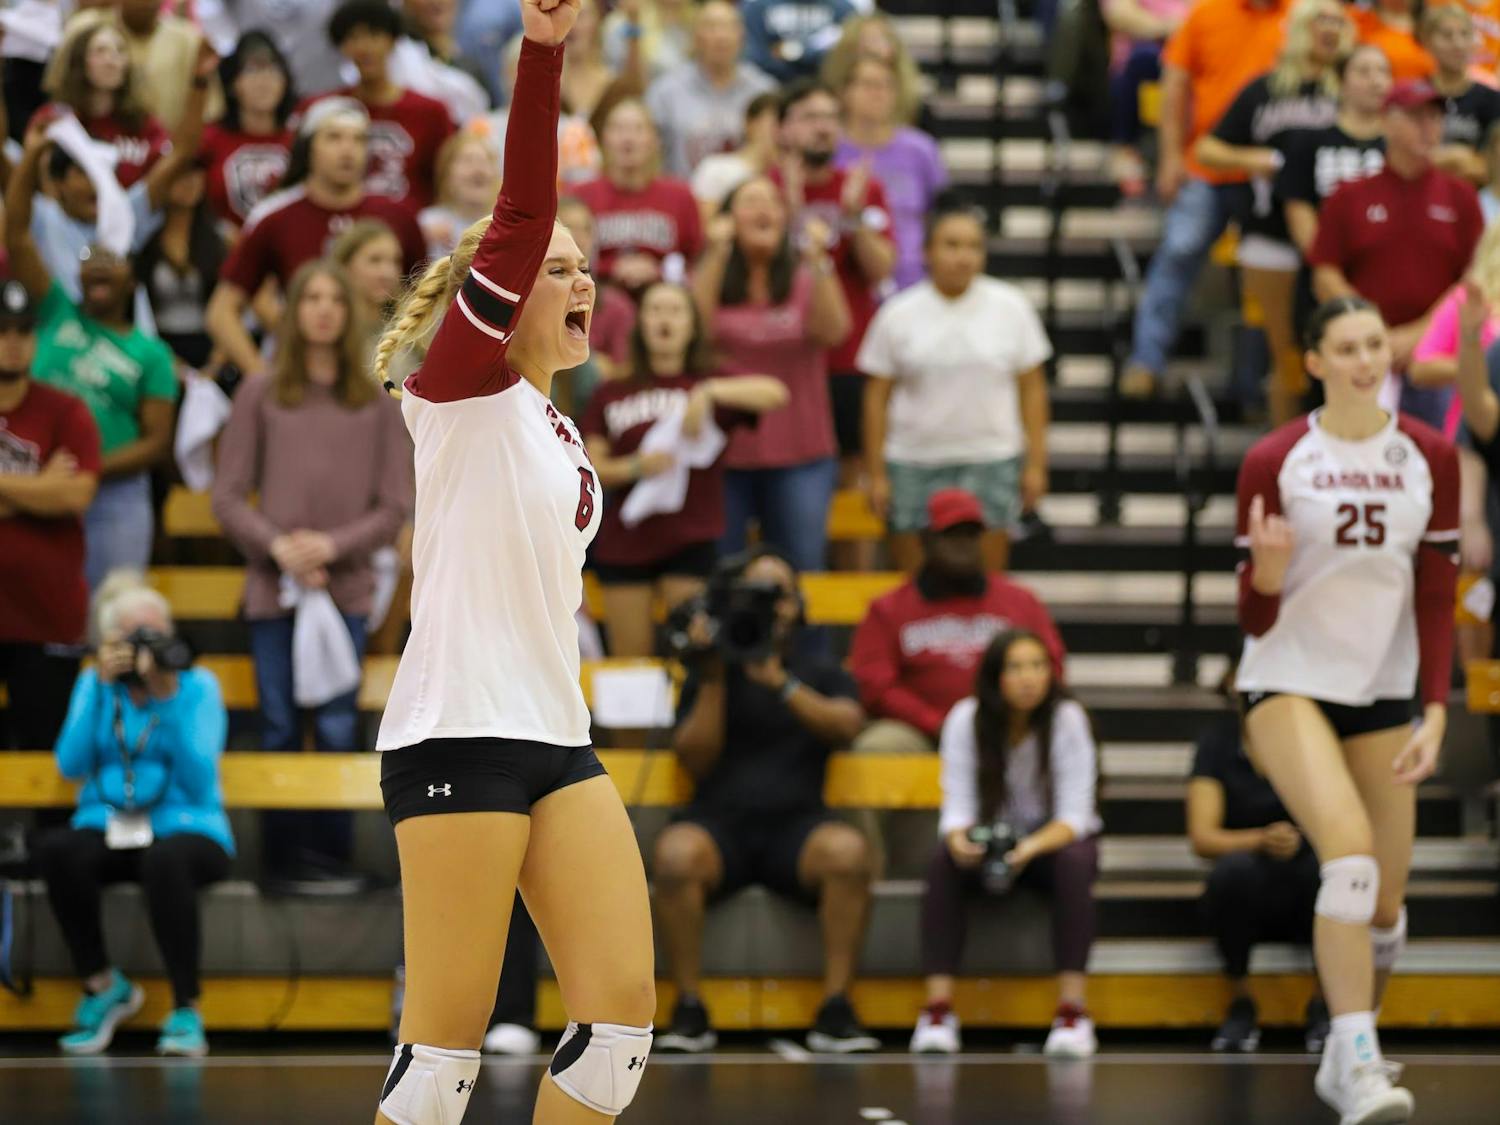 Freshman setter Sydney Floyd celebrates earning a point on Aug. 30, 2023. The South Carolina Gamecocks beat the Clemson Tigers 3-1 in the Palmetto Series game.